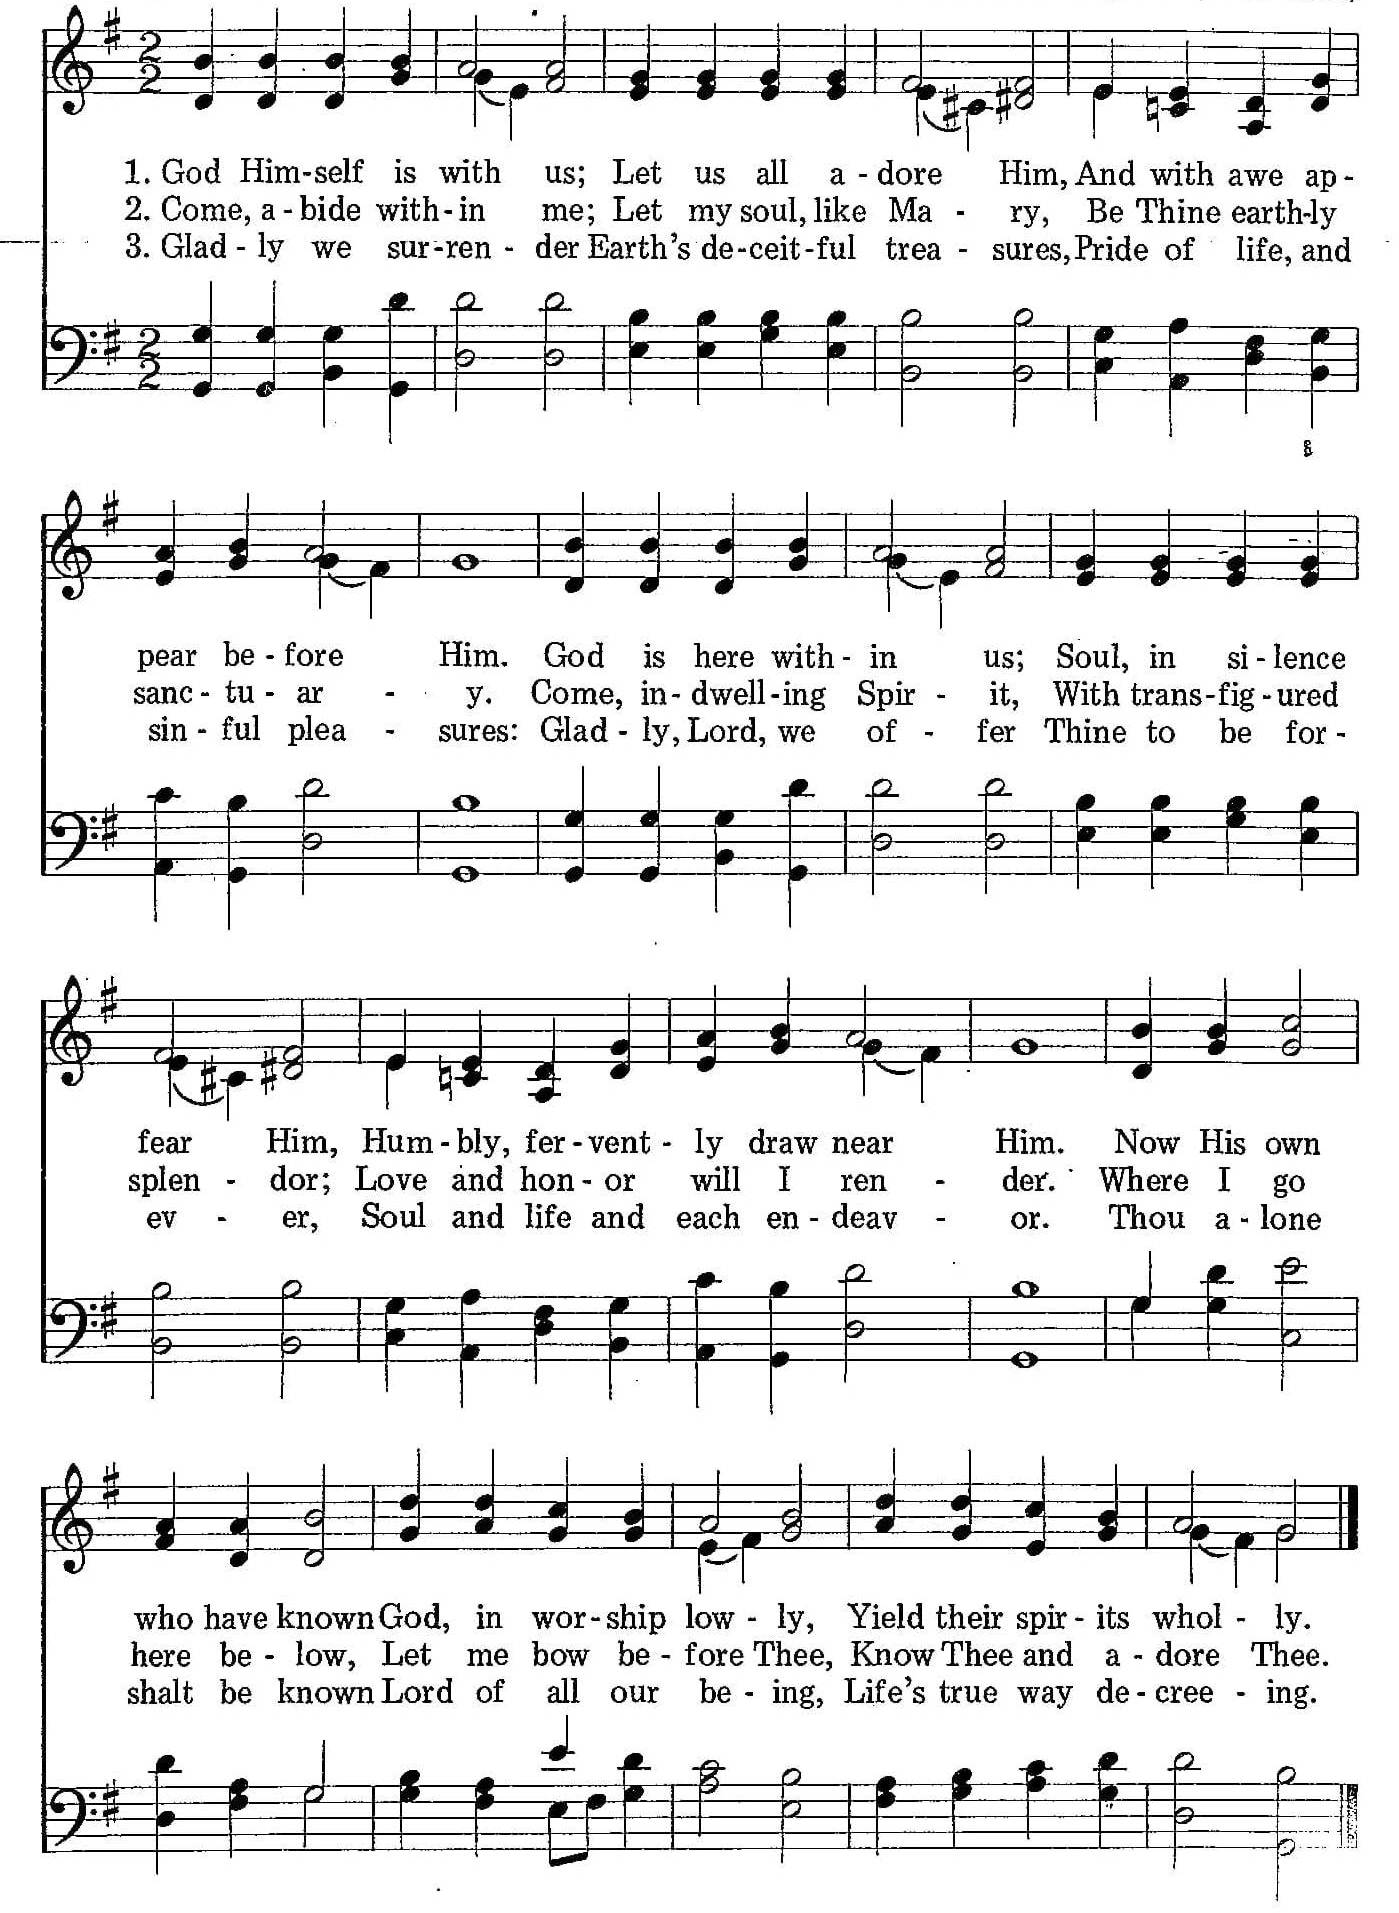 003 – God Himself Is With Us sheet music